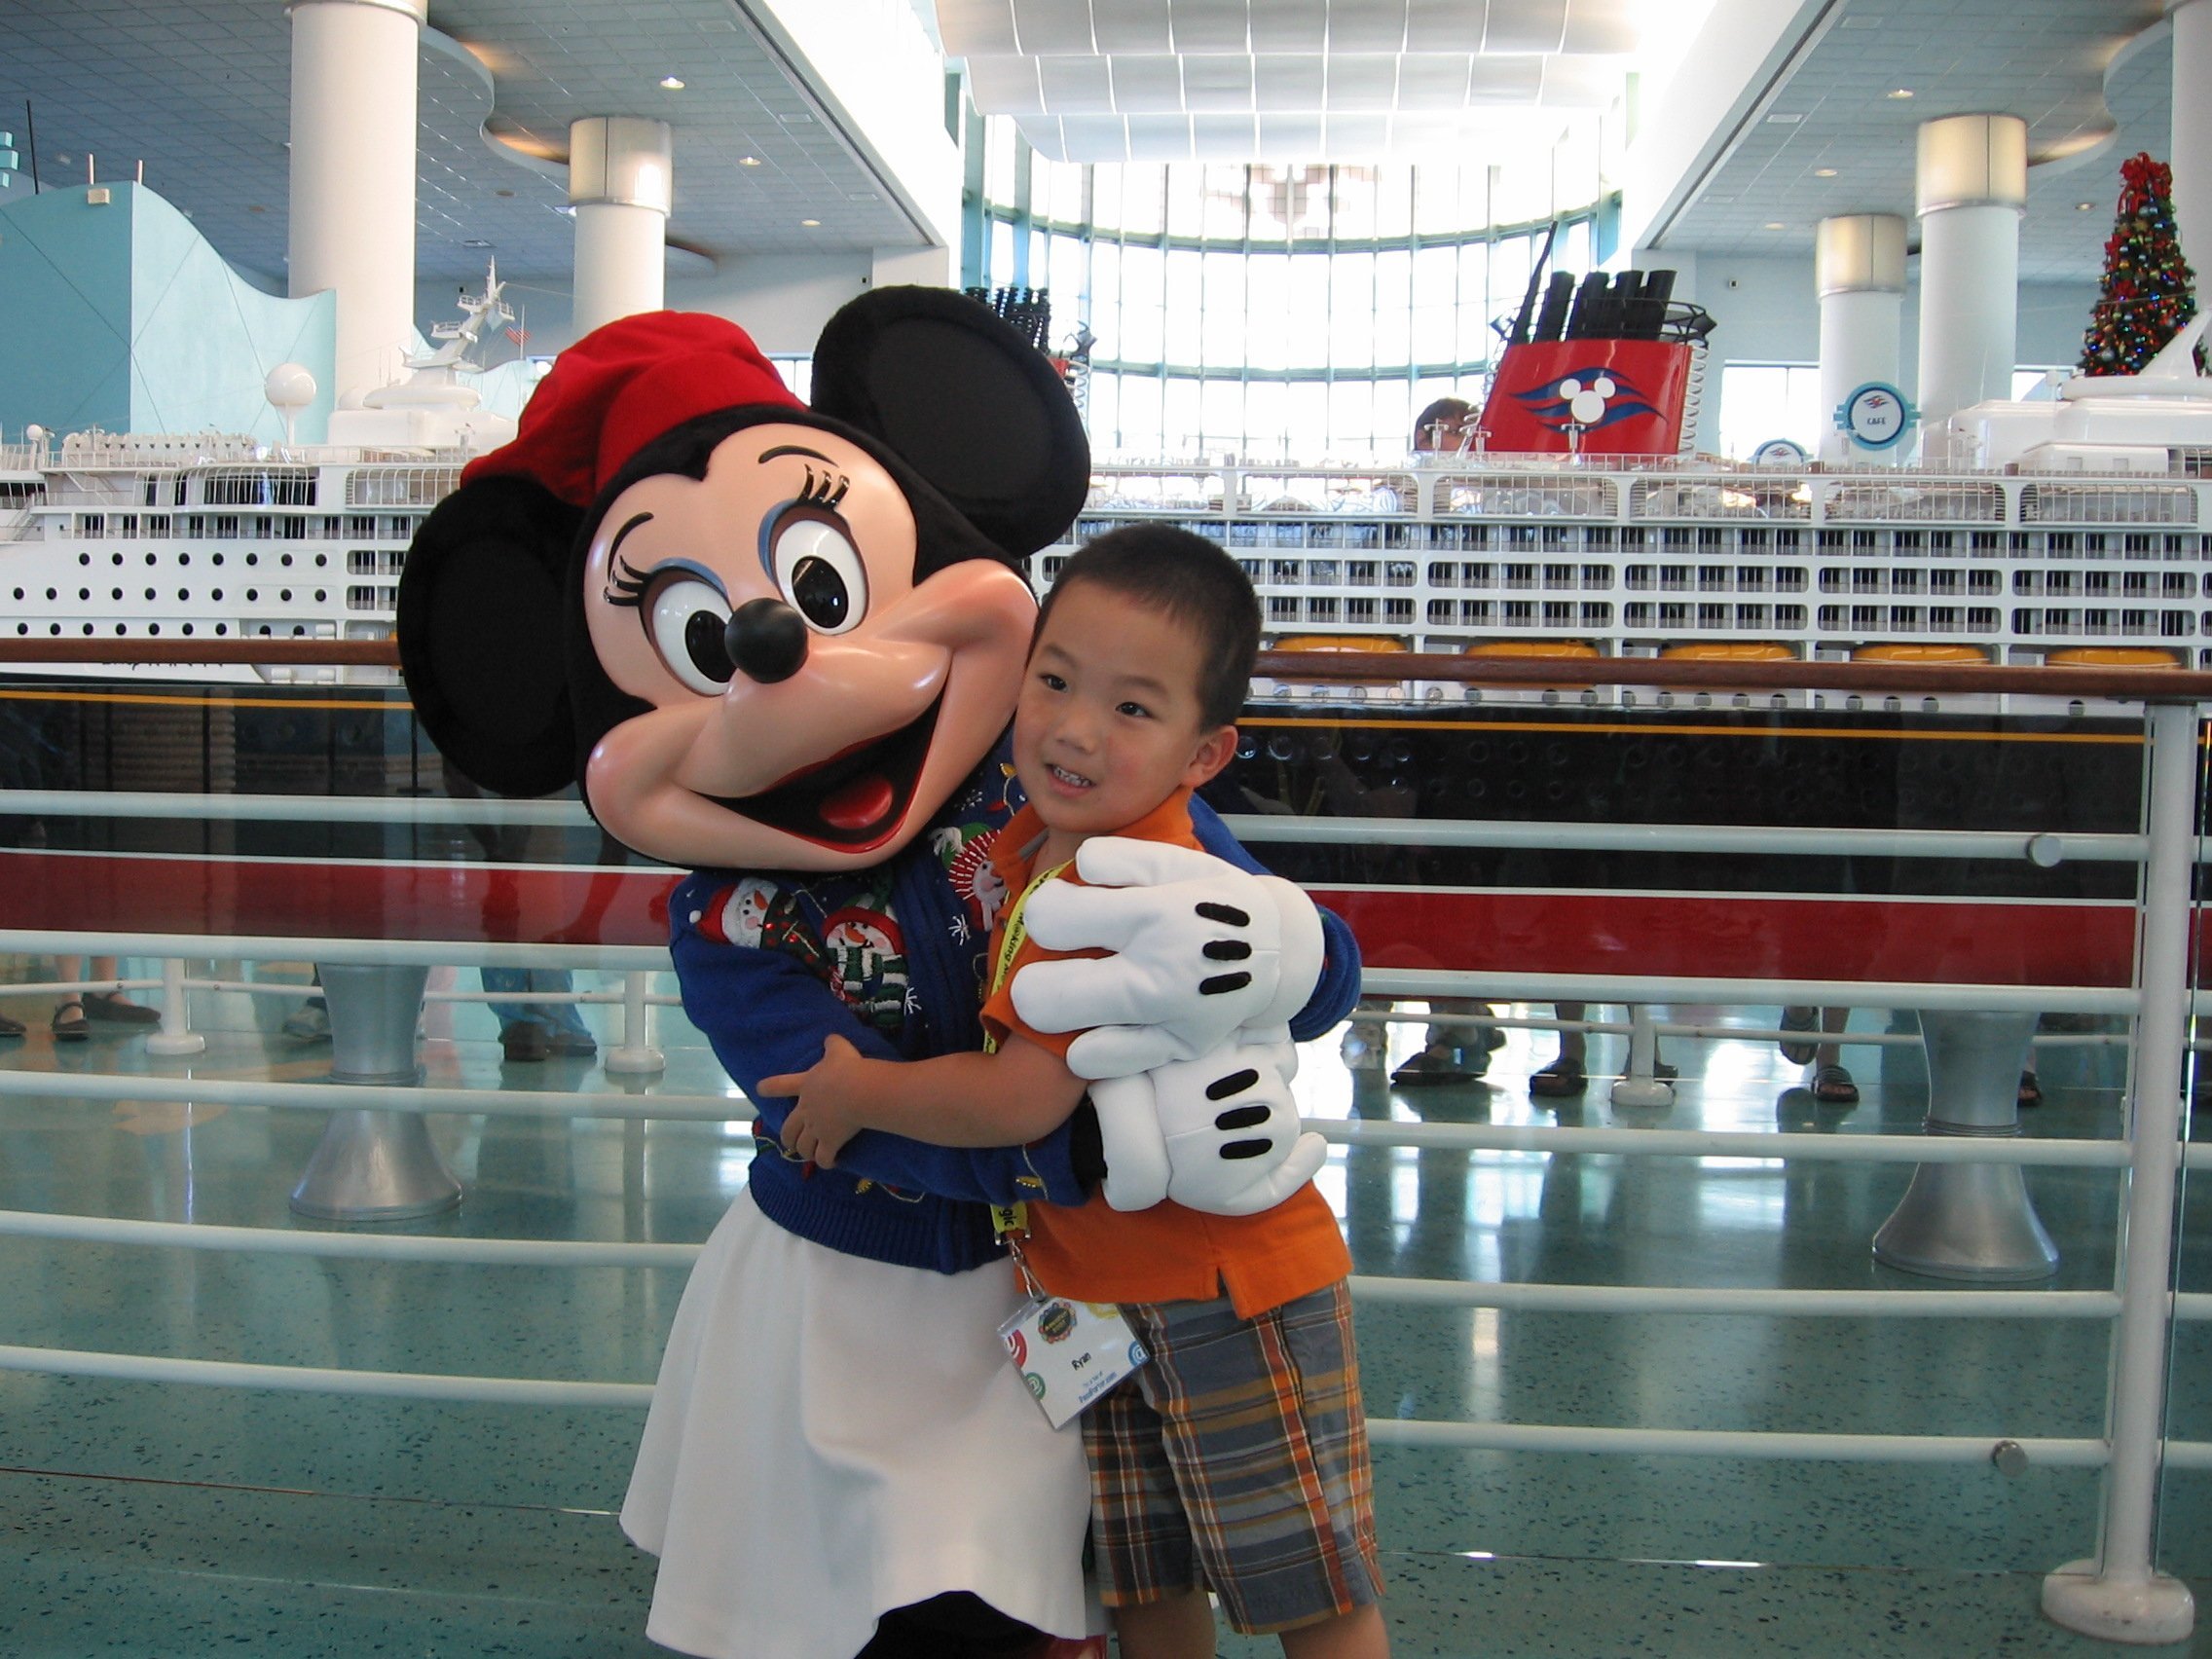 Minnie Mouse greets guests waiting to board the Disney Cruise ships